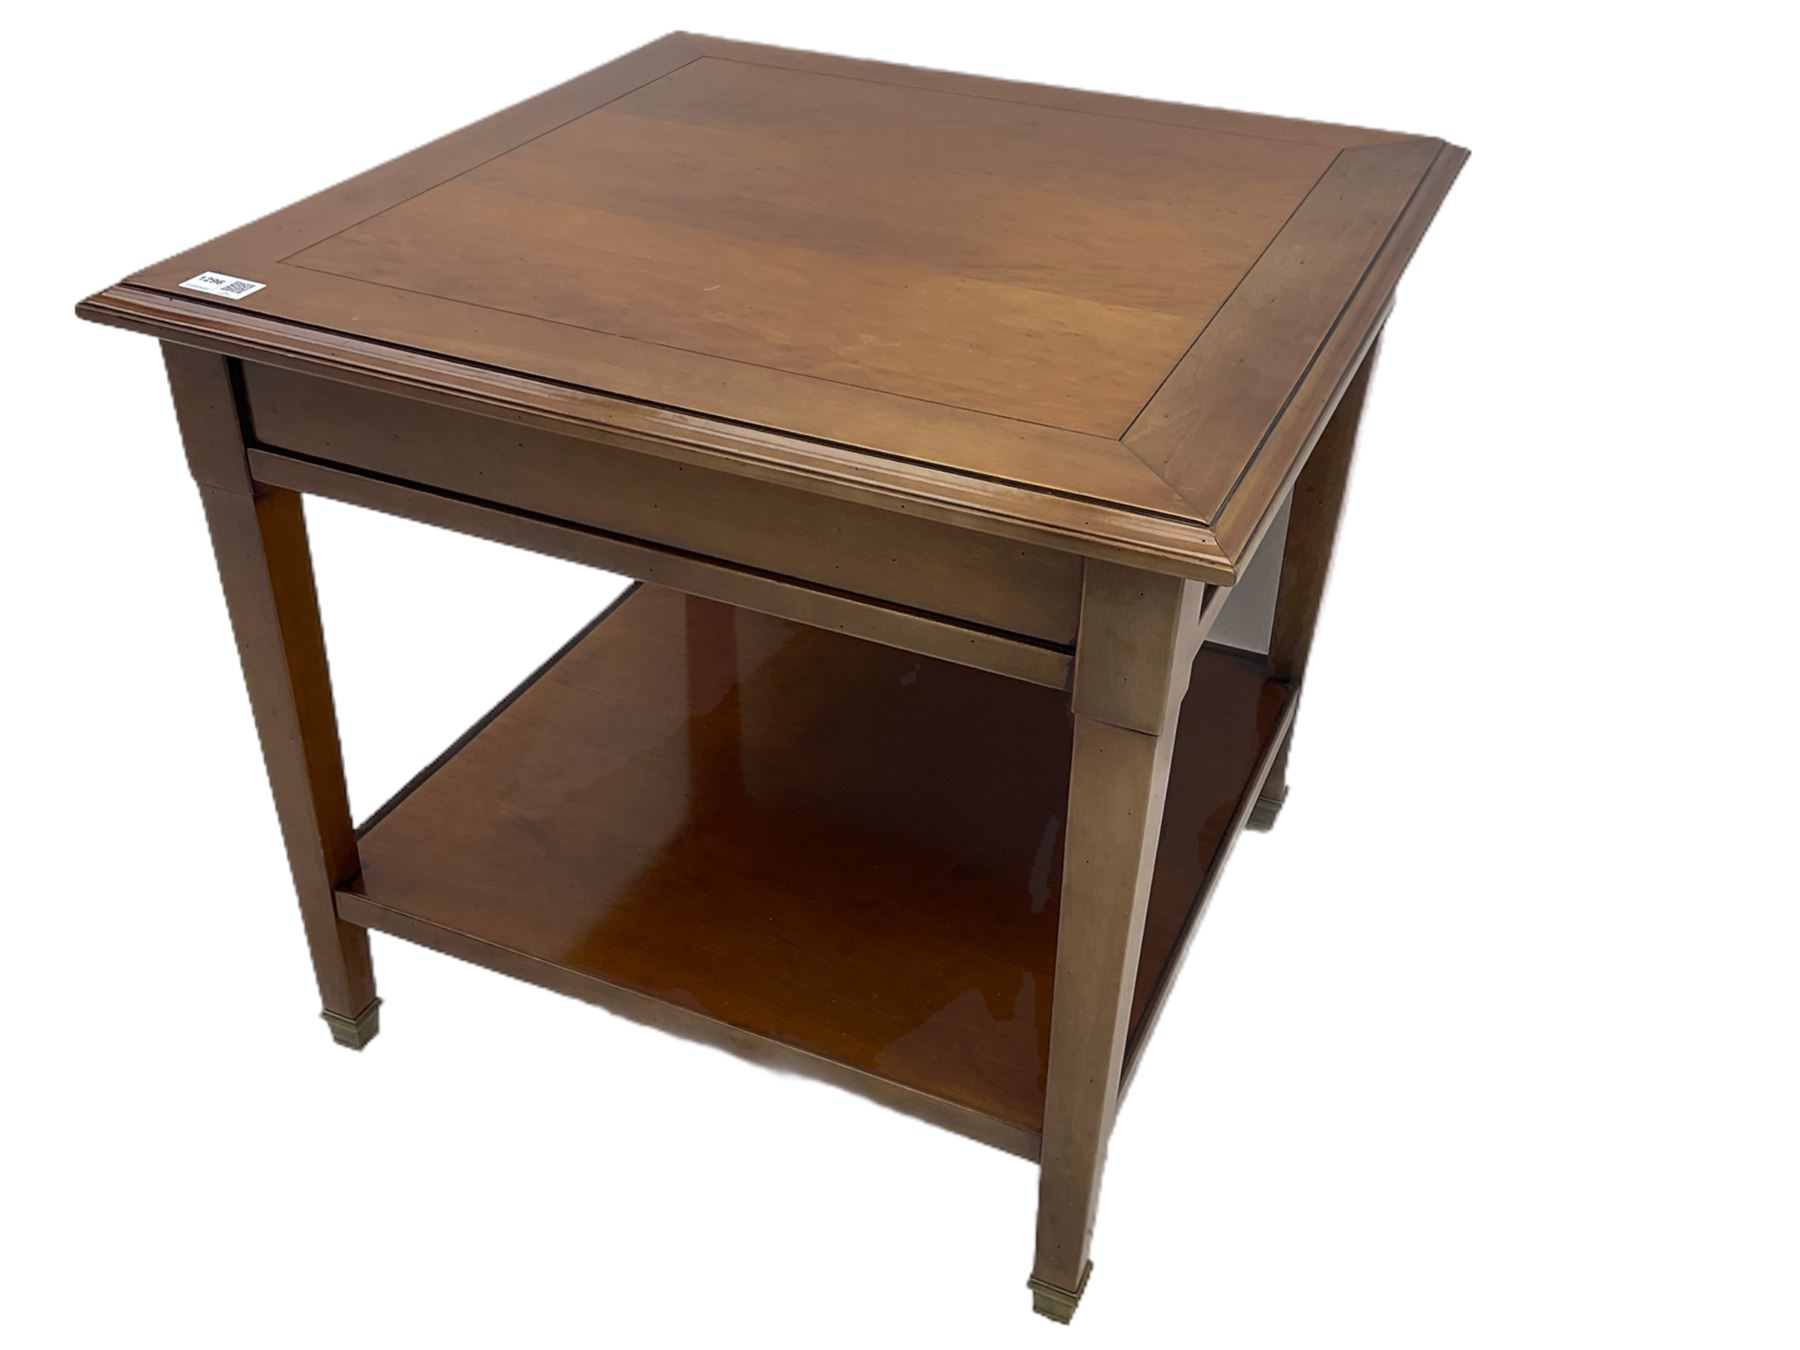 Grange Furniture cherry wood square lamp table - Image 2 of 5